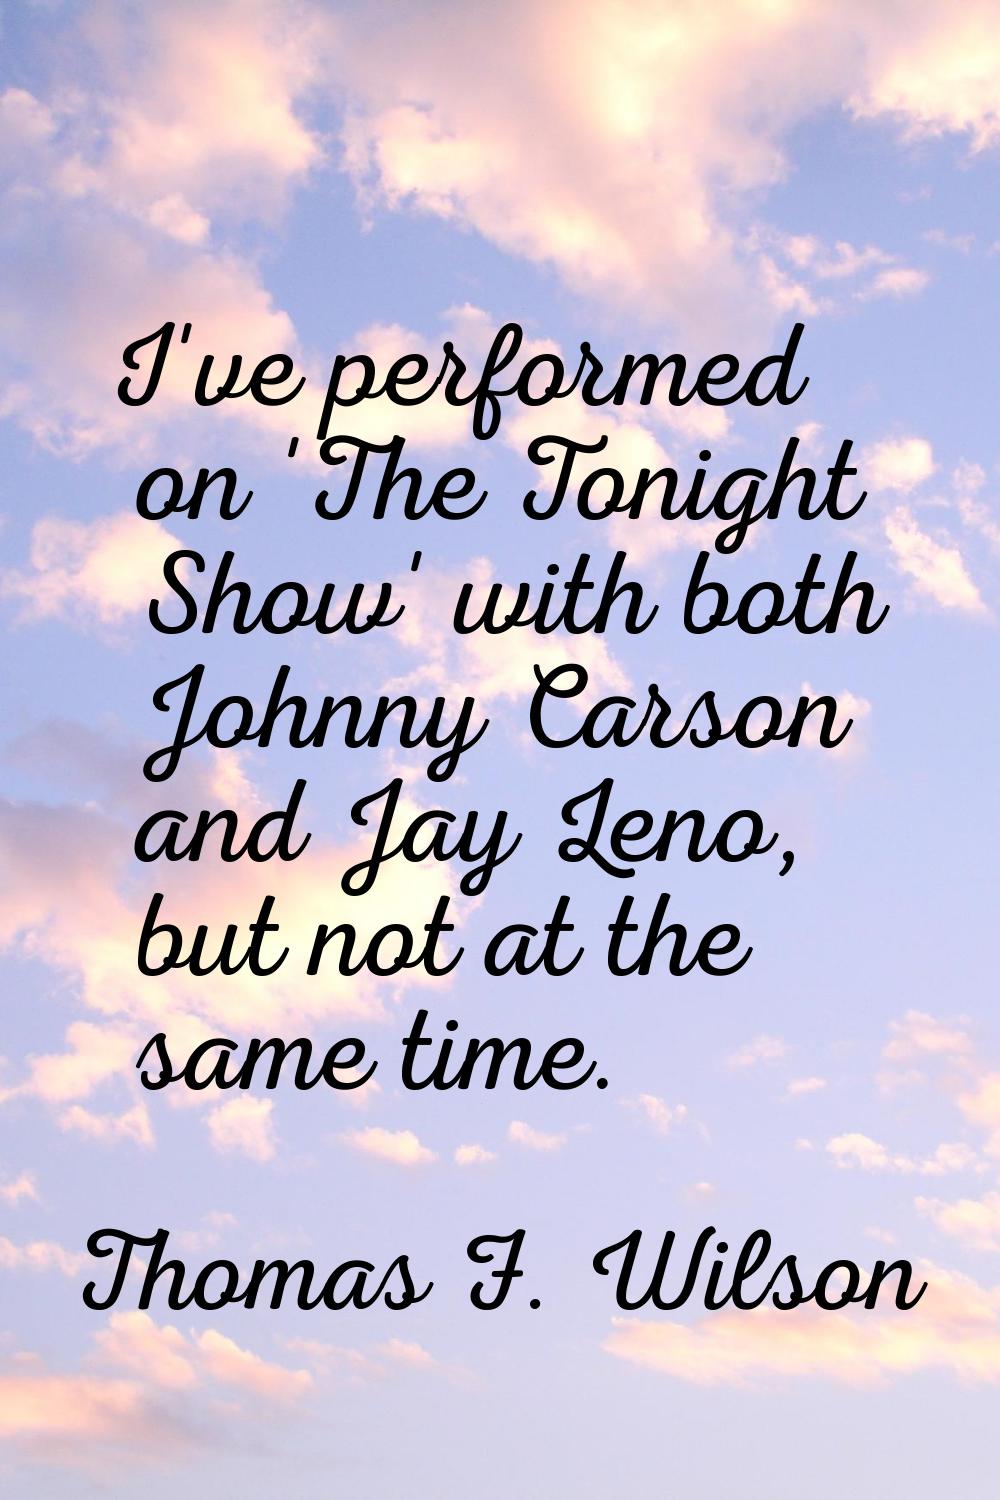 I've performed on 'The Tonight Show' with both Johnny Carson and Jay Leno, but not at the same time